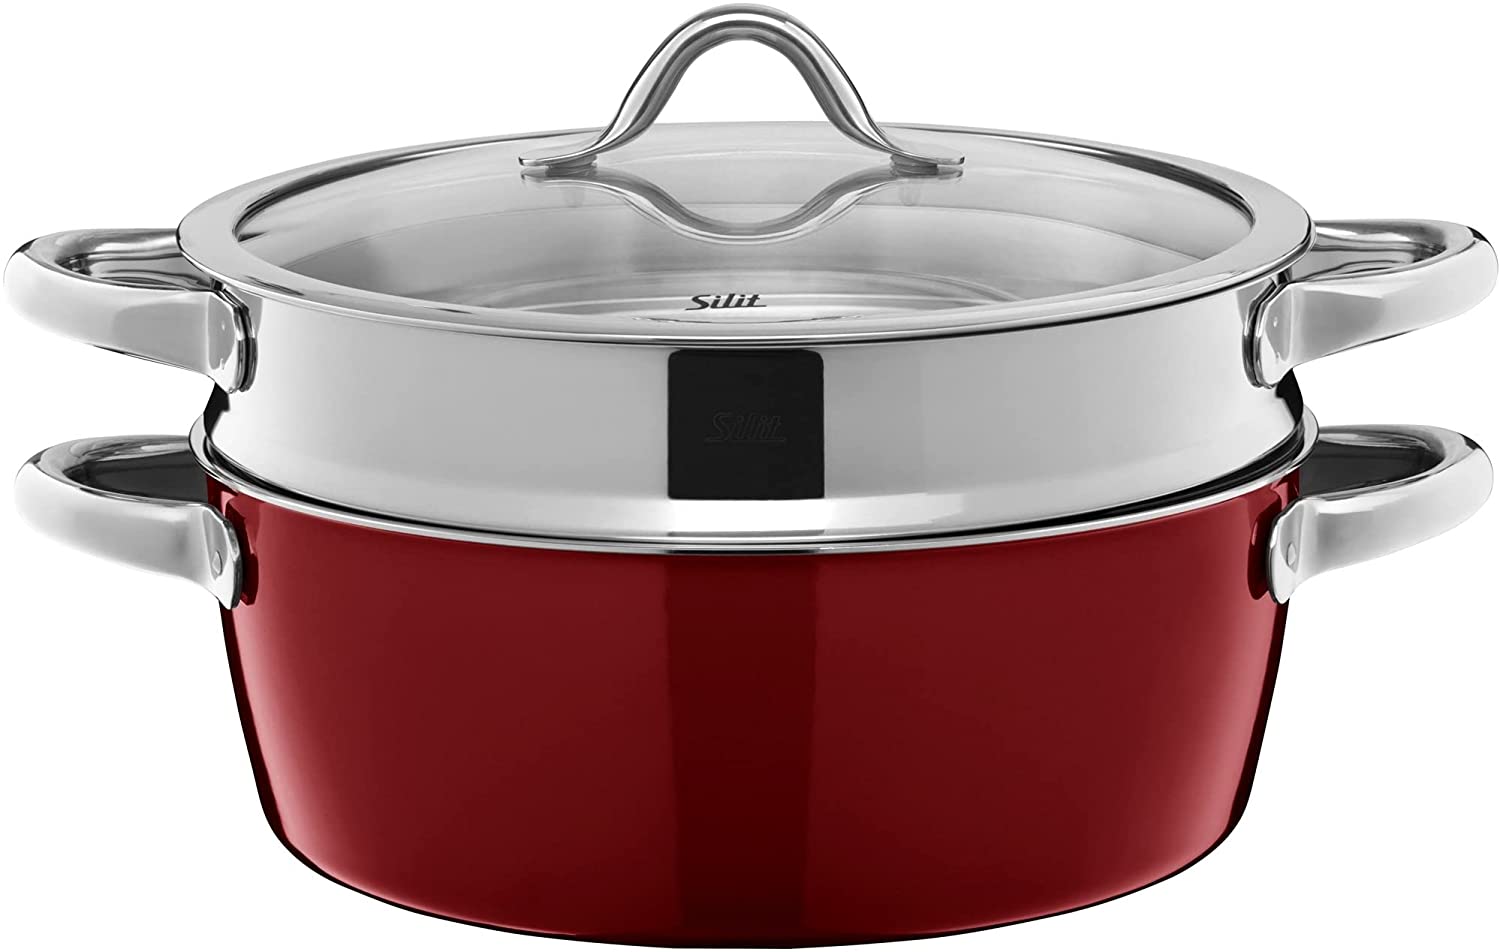 Silit Vitaliano Rosso Steamer with Glass Lid 28 cm Cooking Pot with Steam Insert 5.9 Litres Silargan Functional Ceramic Induction Pot Dark Red